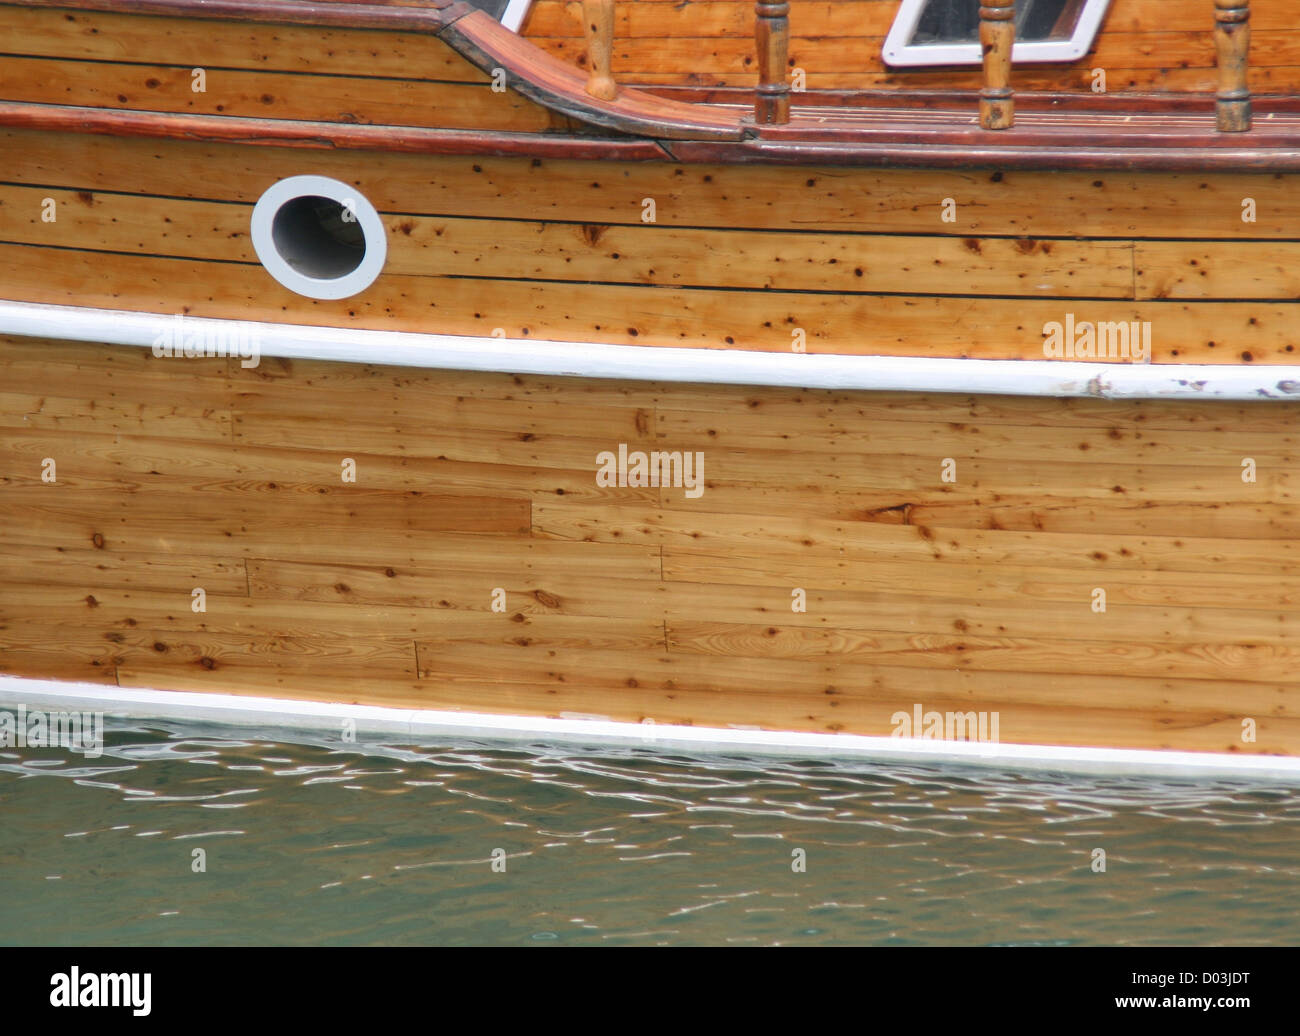 Old wood boat. Stock Photo